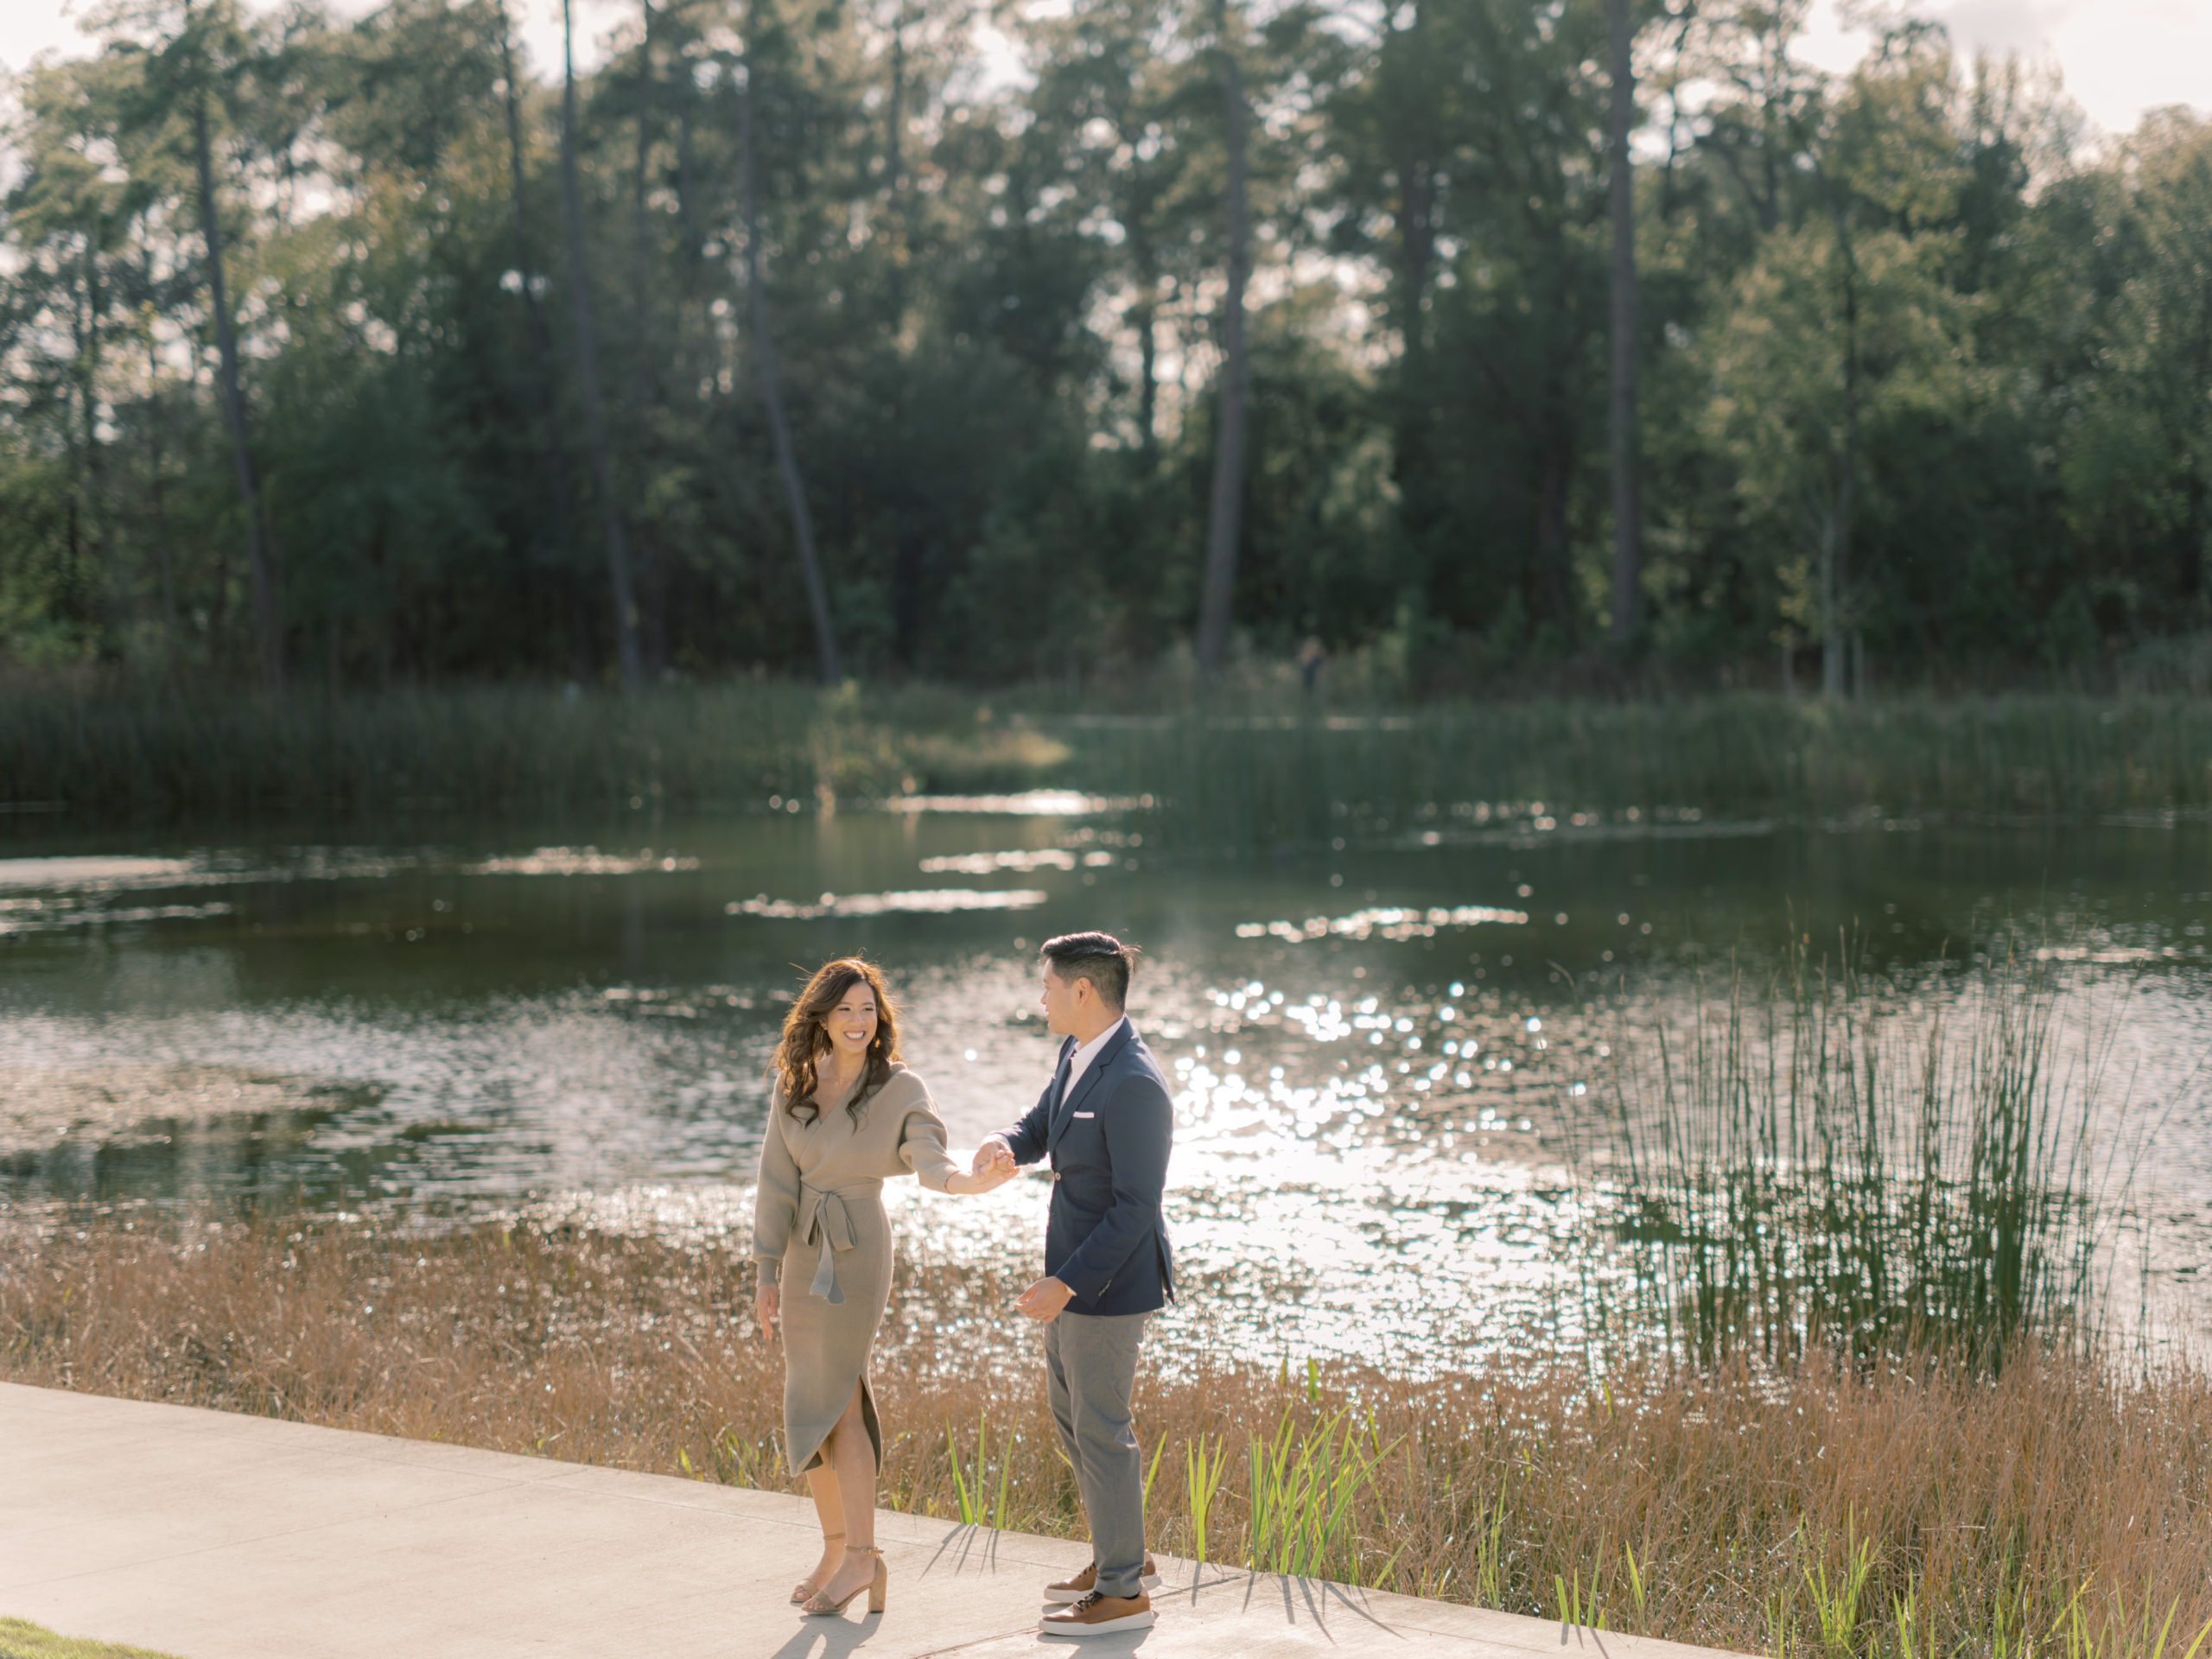 The engaged couple is happily hanging out with each other beside a lake. Image by Jenny Fu Studio